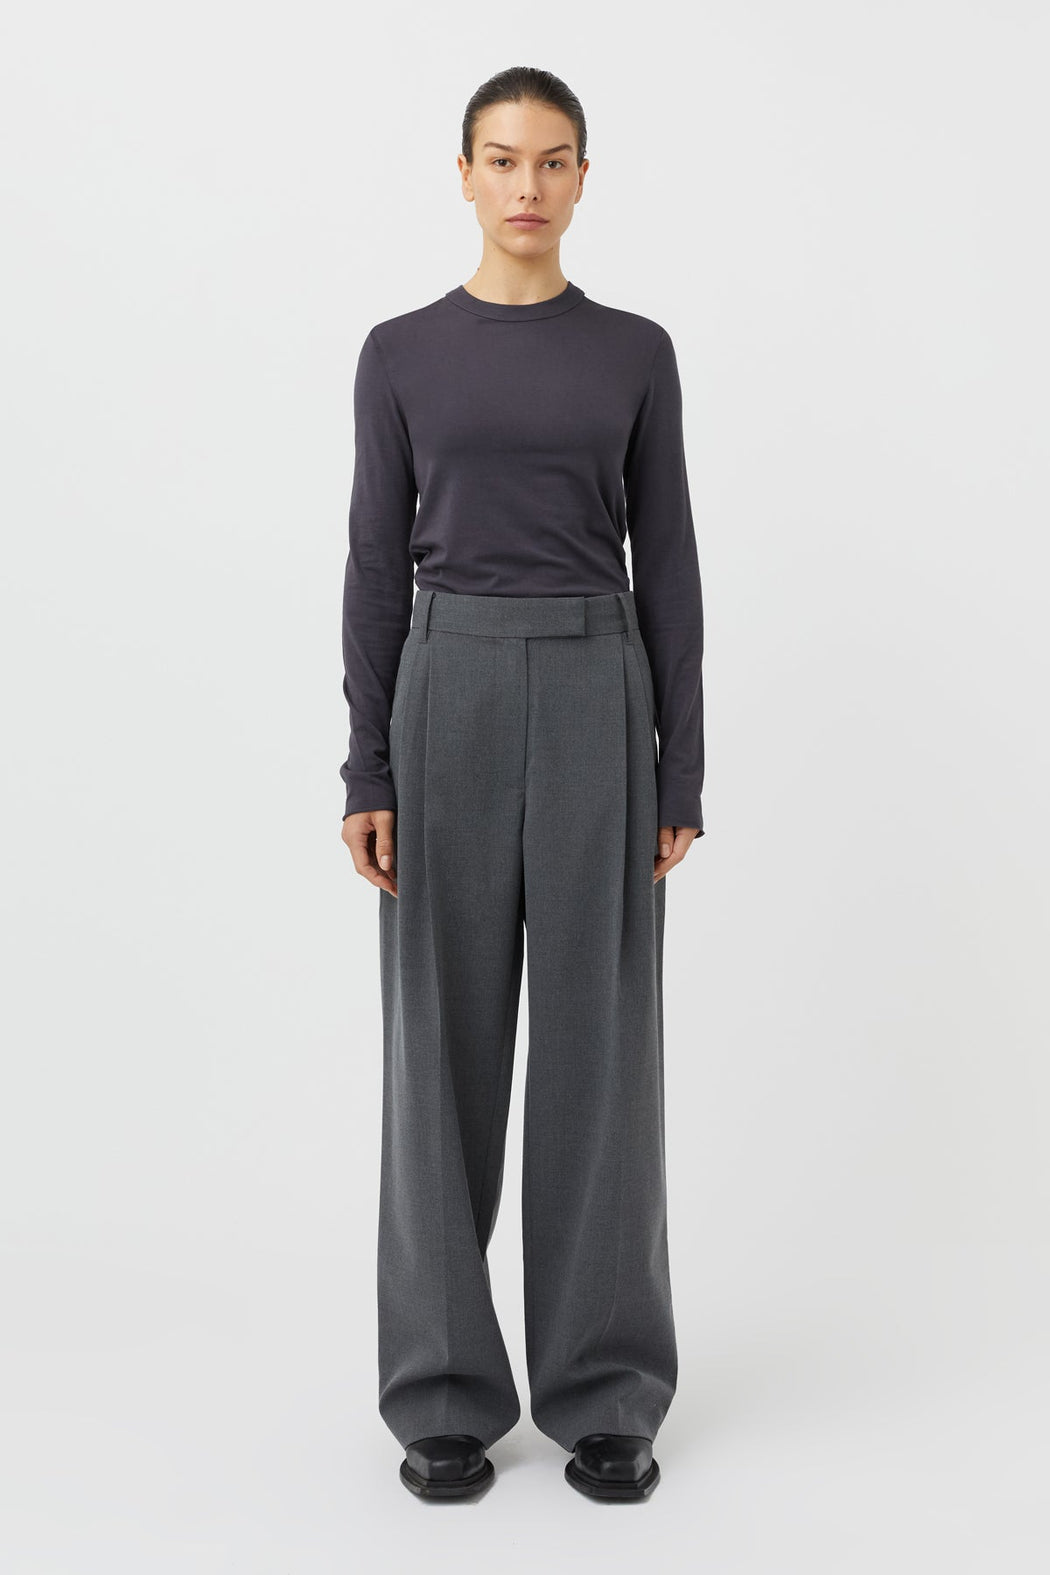 Camilla and Marc  Mira Tailored Pant Stone  Girls with Gems